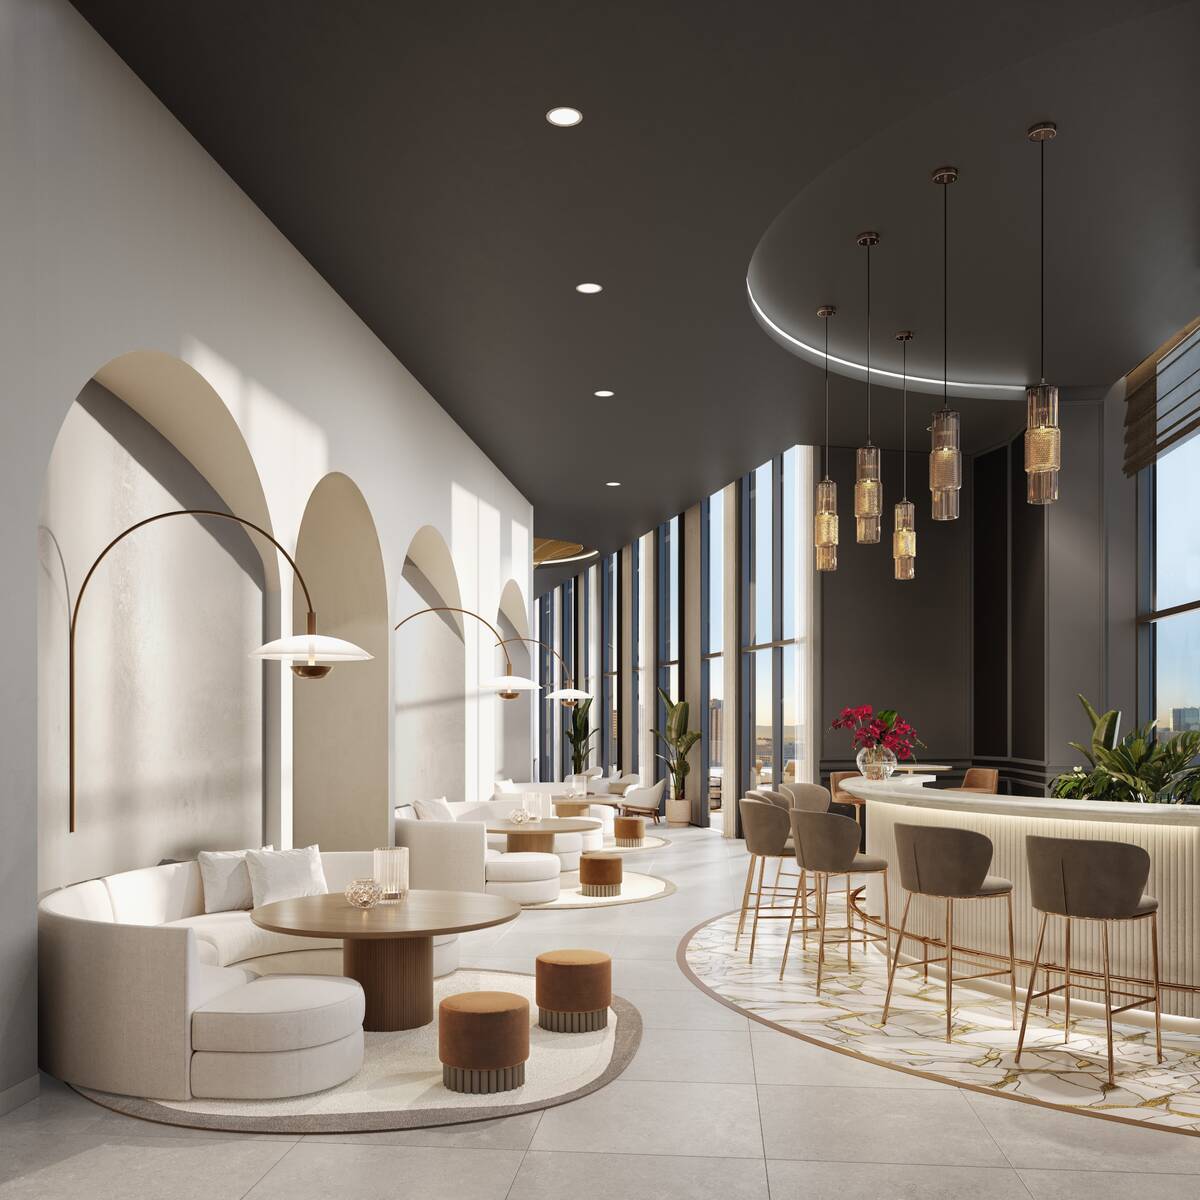 Renderings for the interior of the 32-story luxury condo high-rise Cello Tower in the Symphony ...